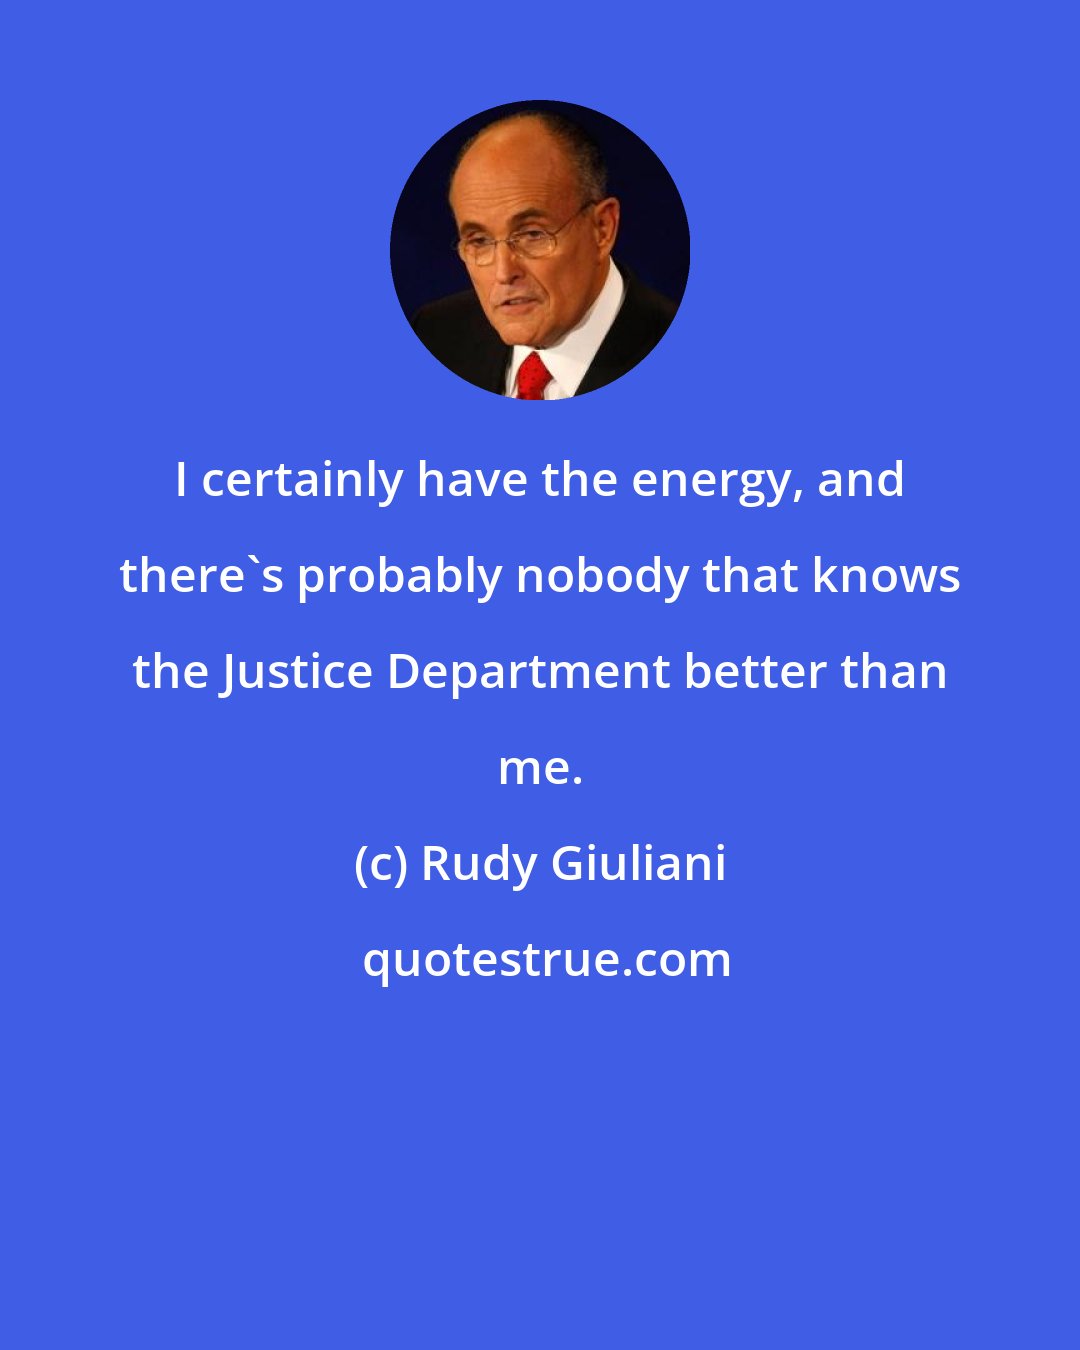 Rudy Giuliani: I certainly have the energy, and there's probably nobody that knows the Justice Department better than me.